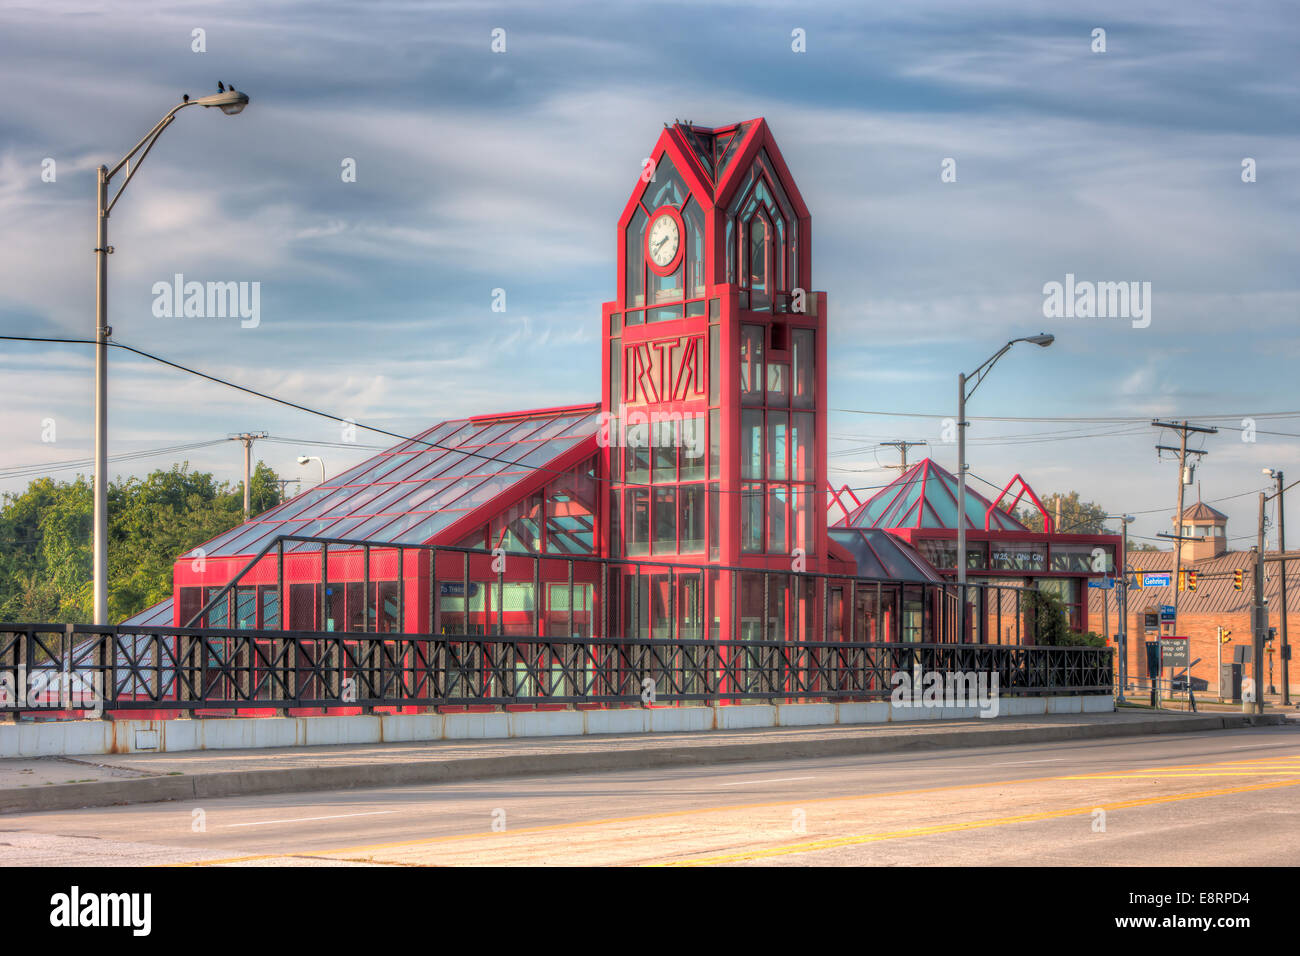 The West 25th Street - Ohio City rapid transit station on the West Side of Cleveland, Ohio. Stock Photo